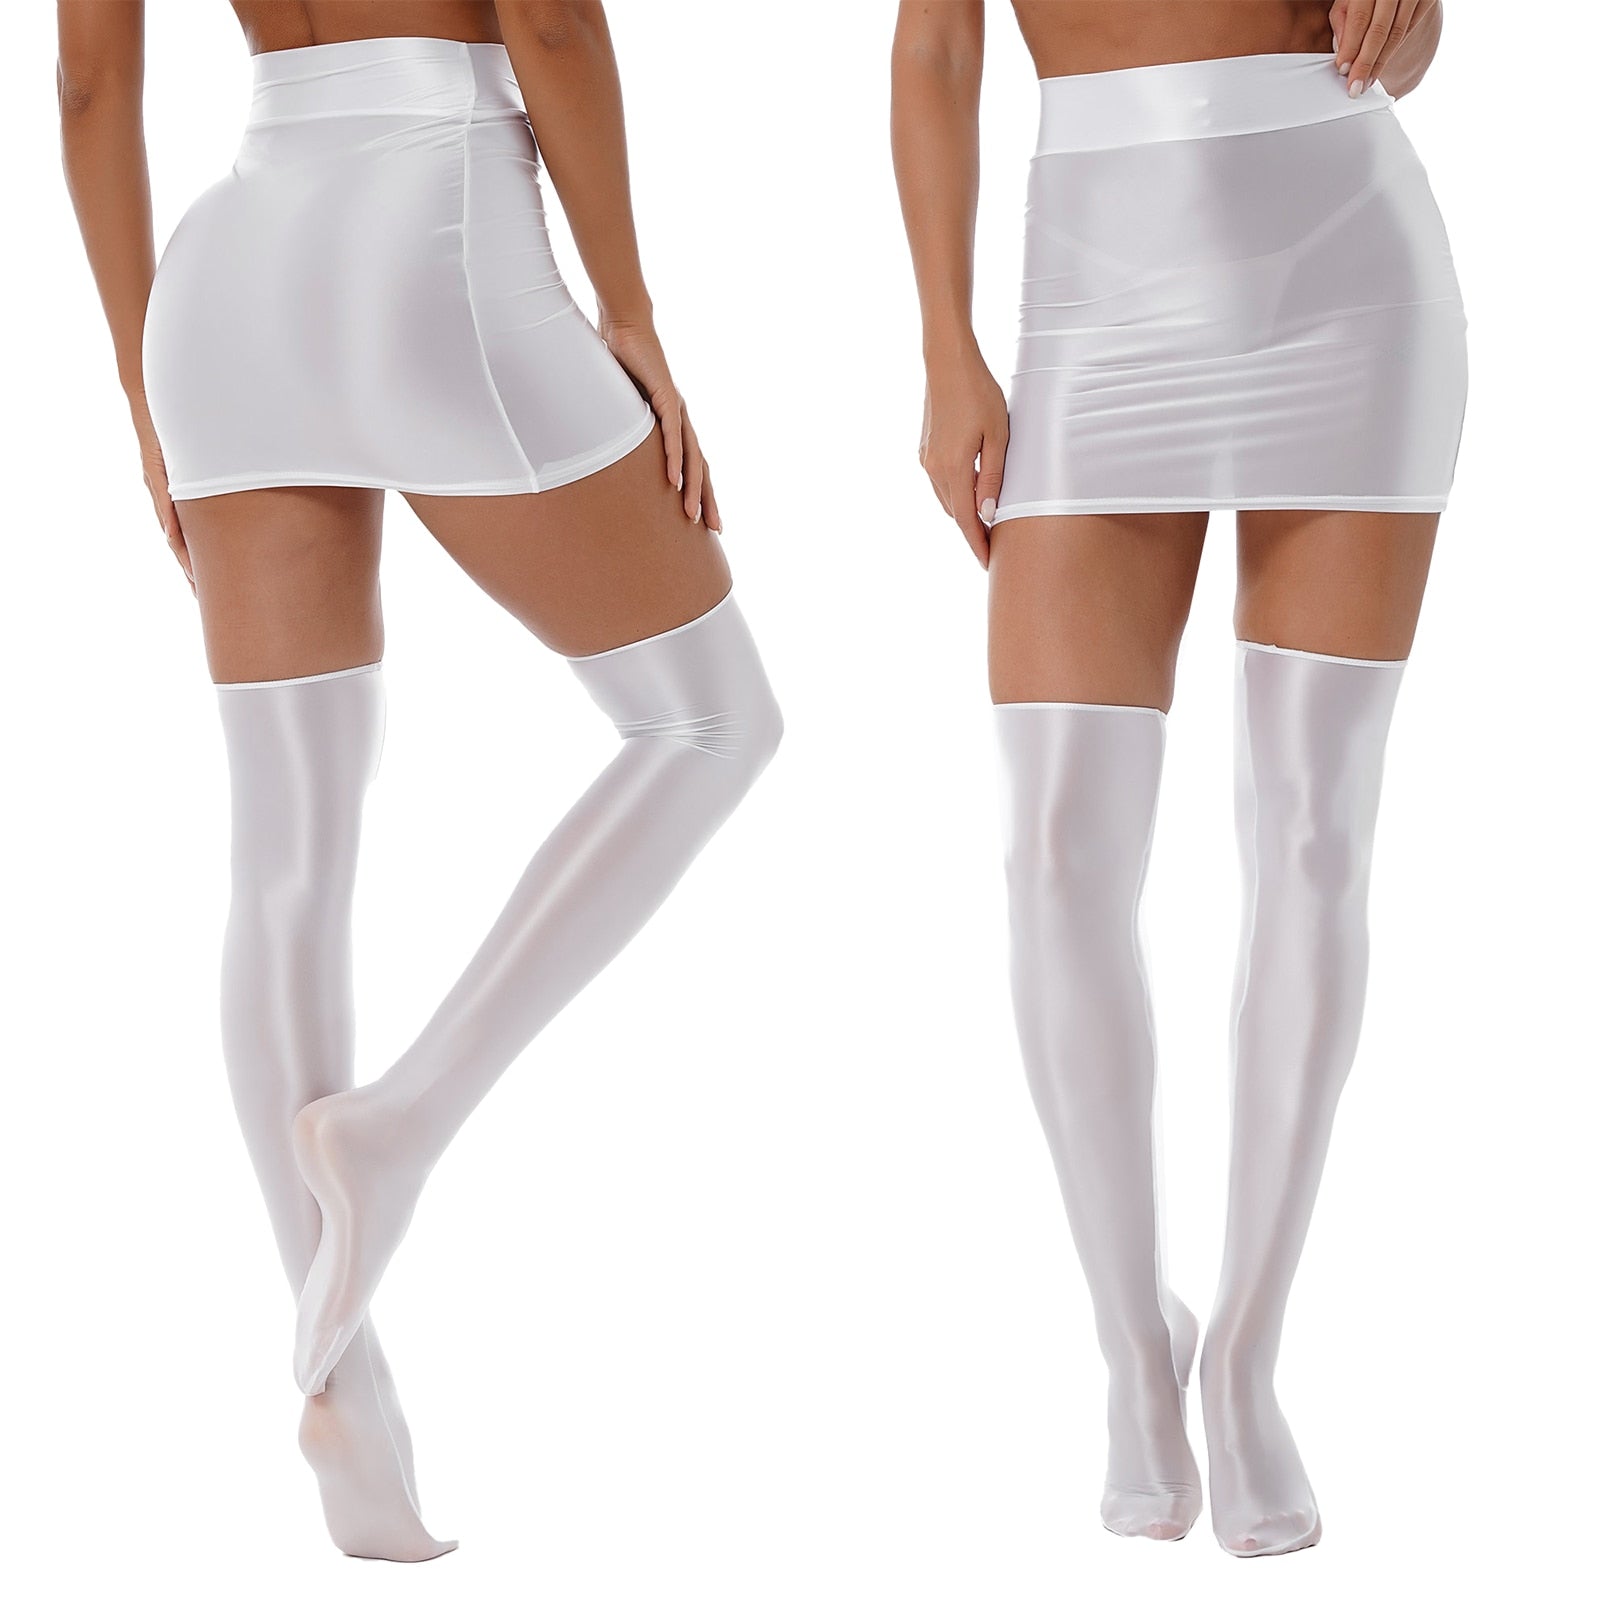 Back and front view of lady wearing wet look white mini skirts with matching thigh high stockings.